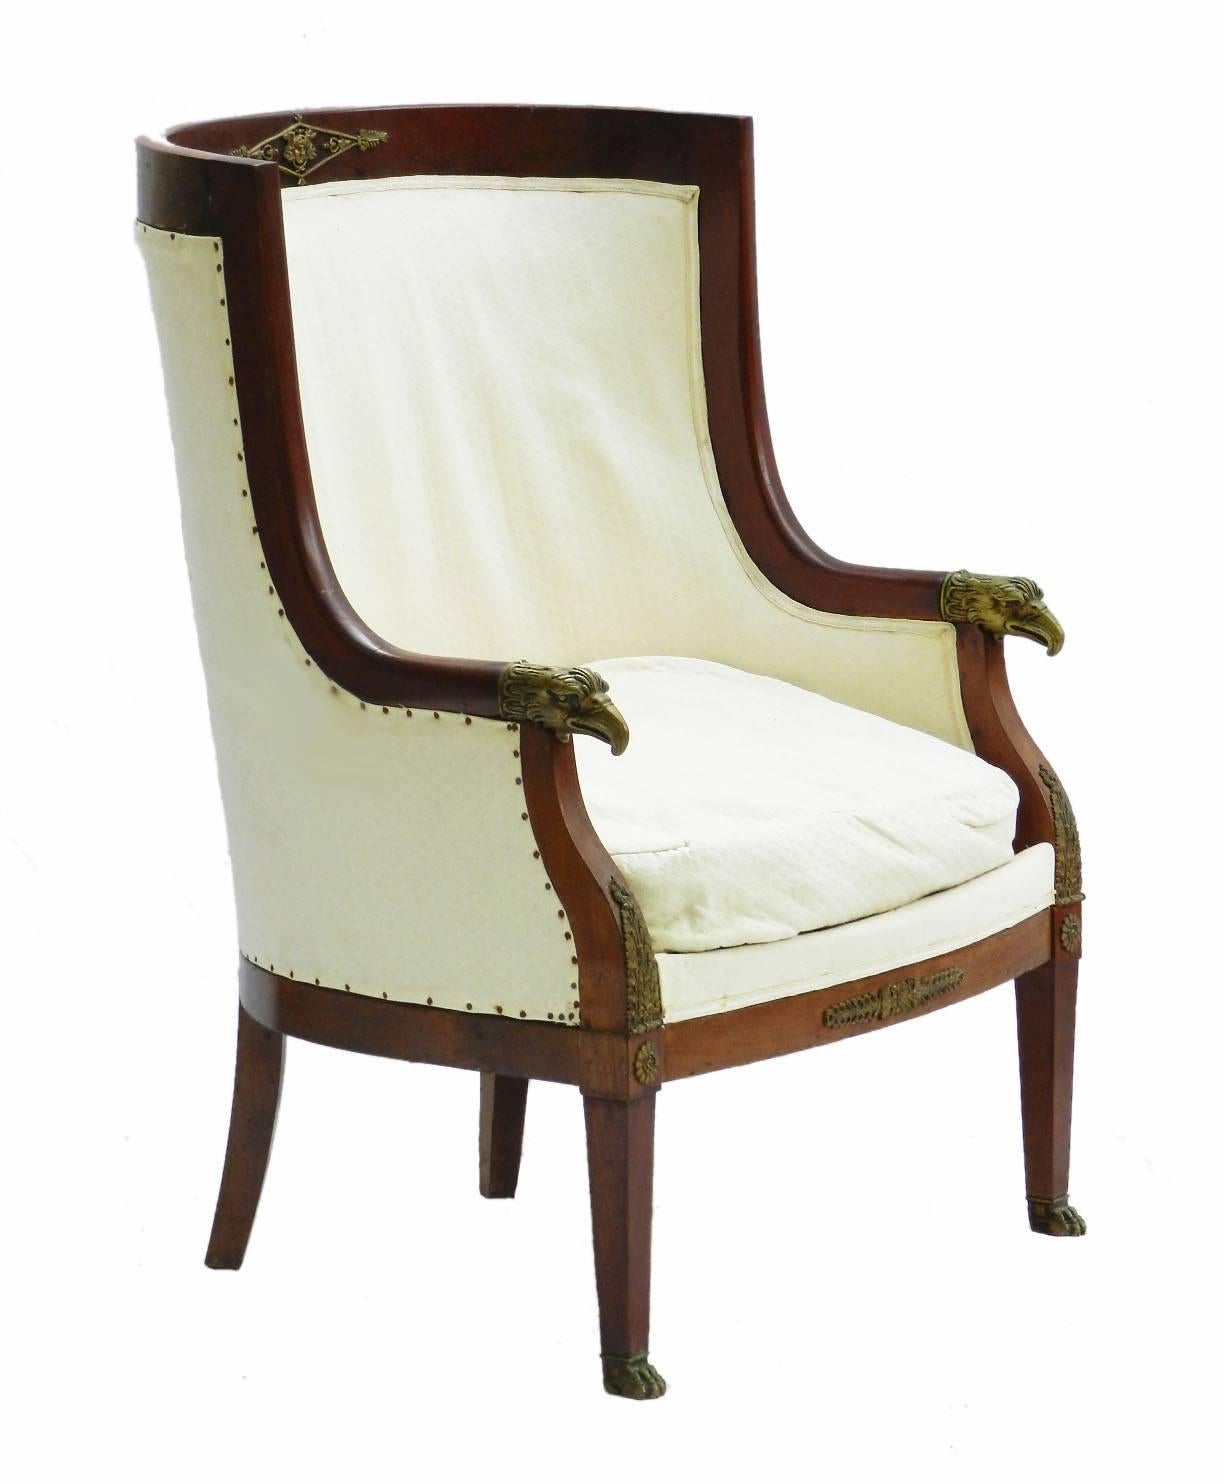 Pair of Bergere Armchairs French Empire Revival Barrel Chairs 2